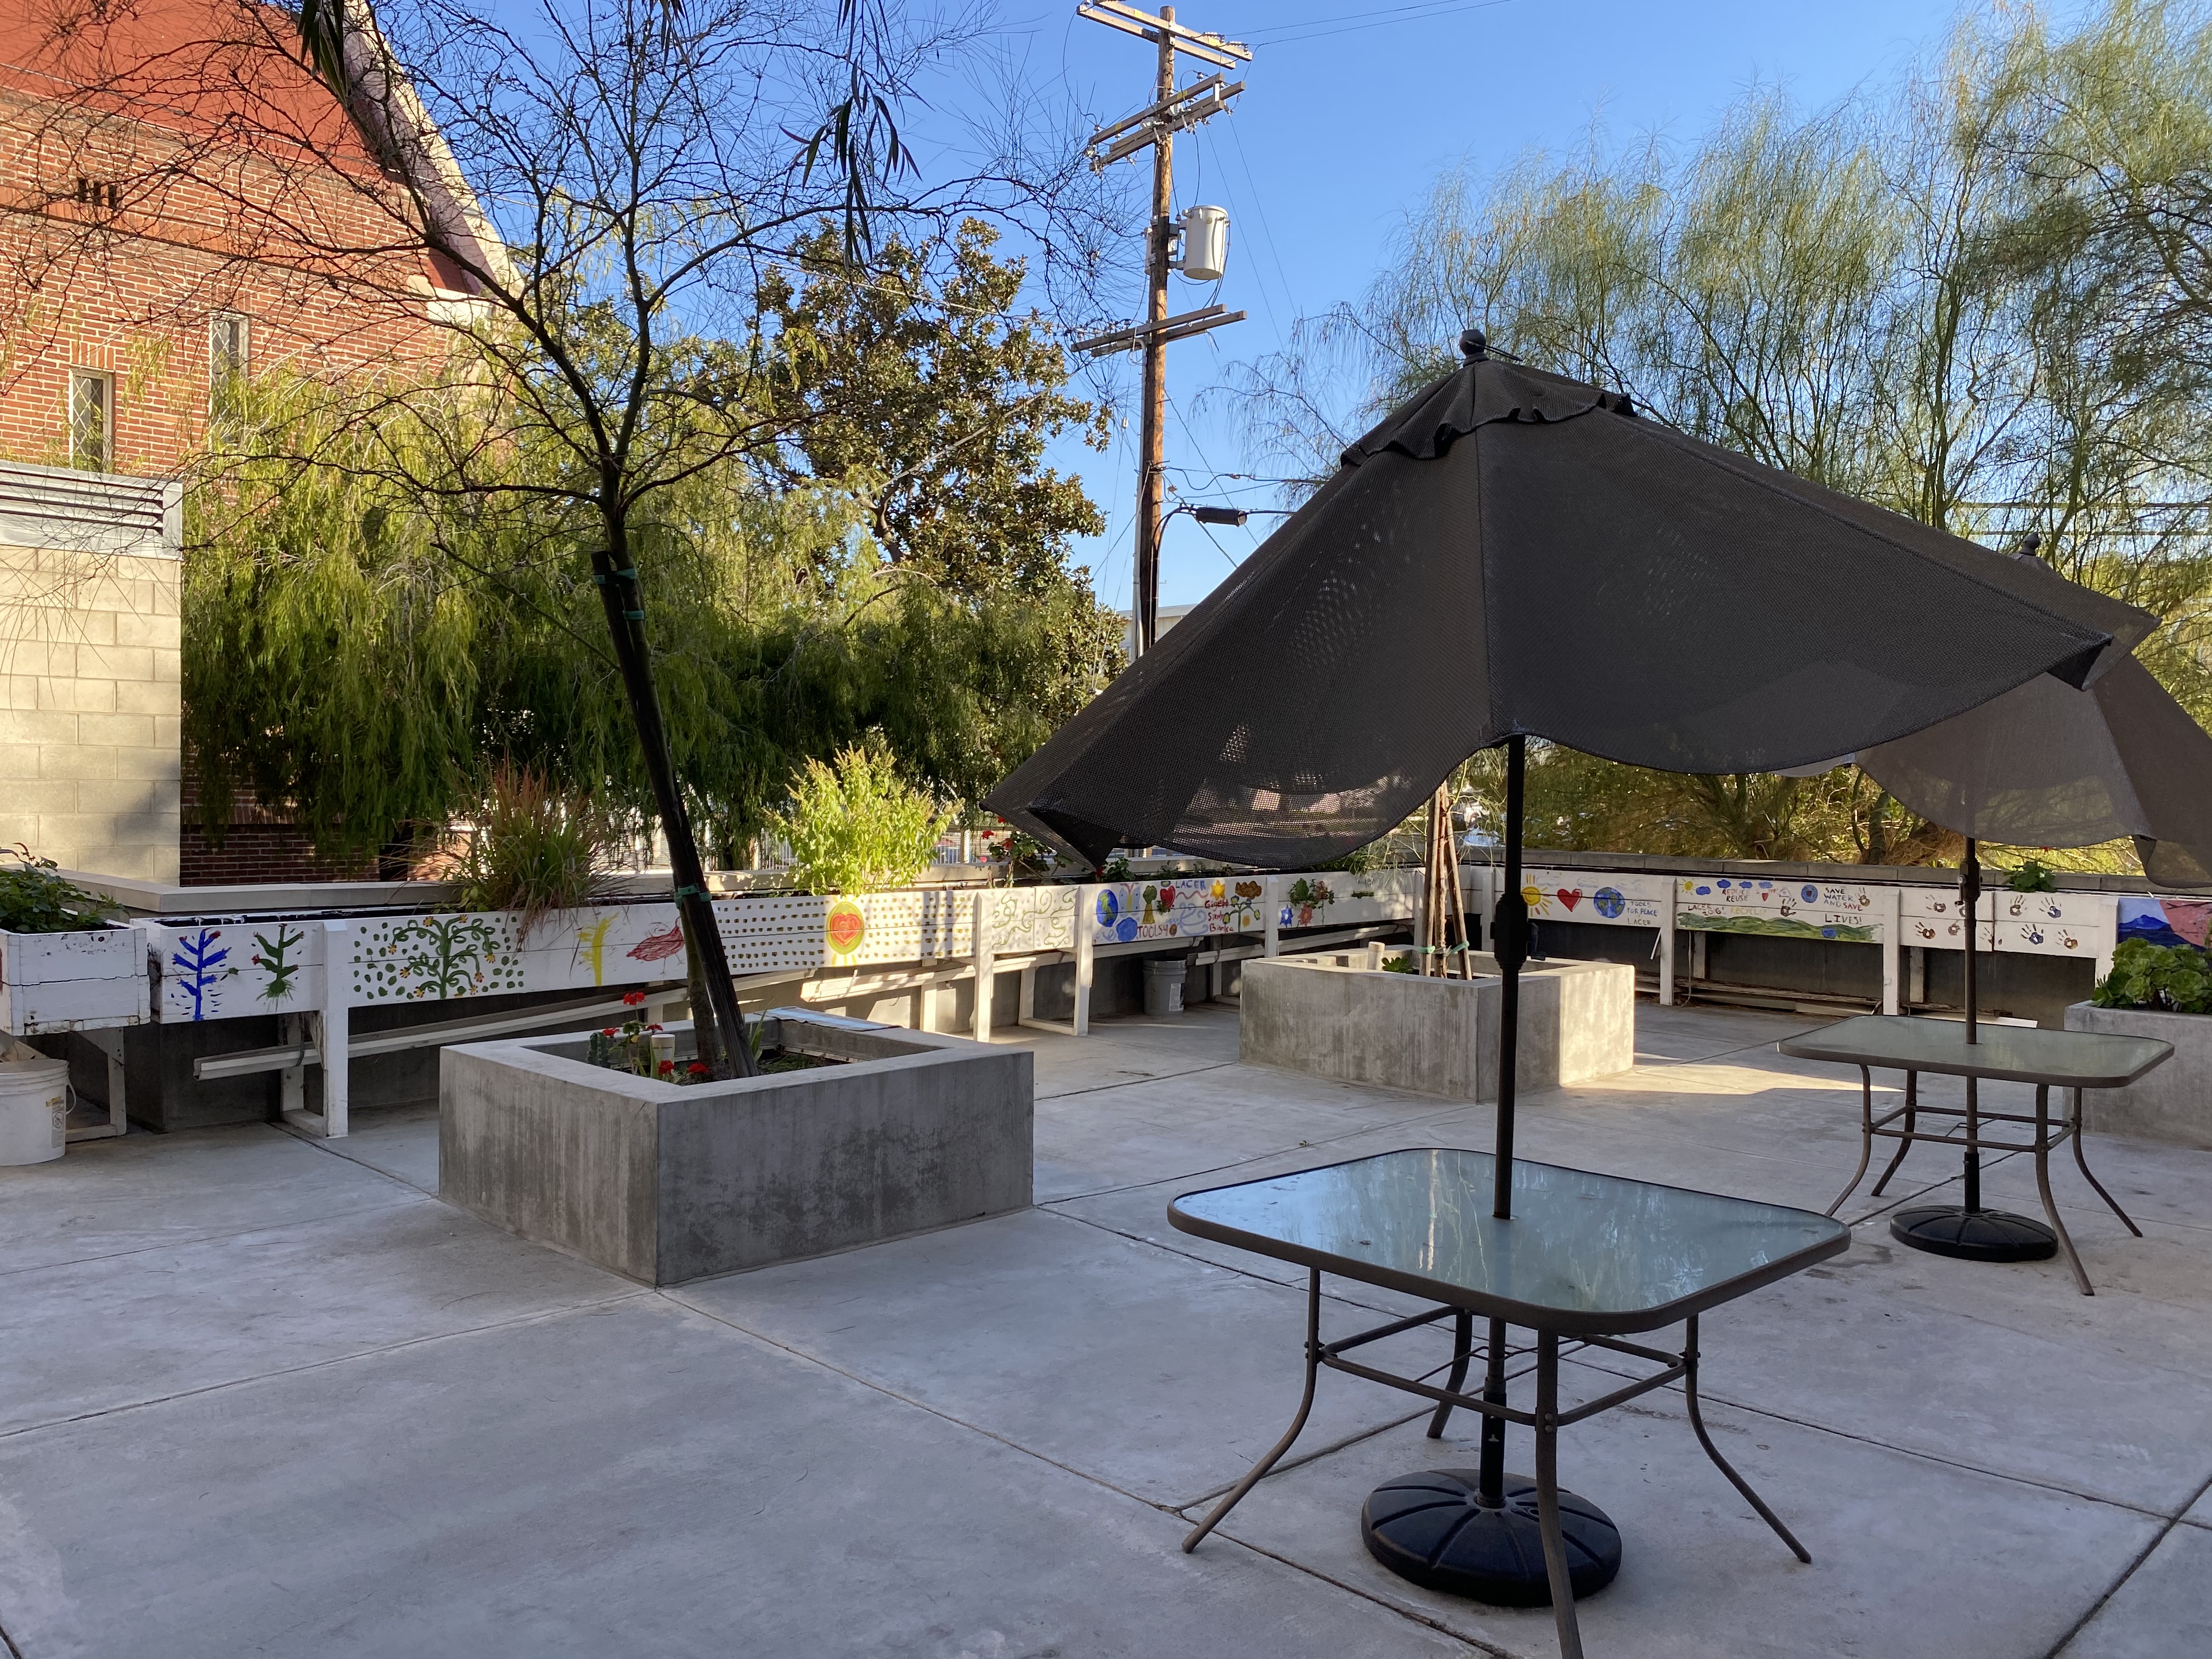 Patio with tables and umbrellas at Rosewood Gardens.